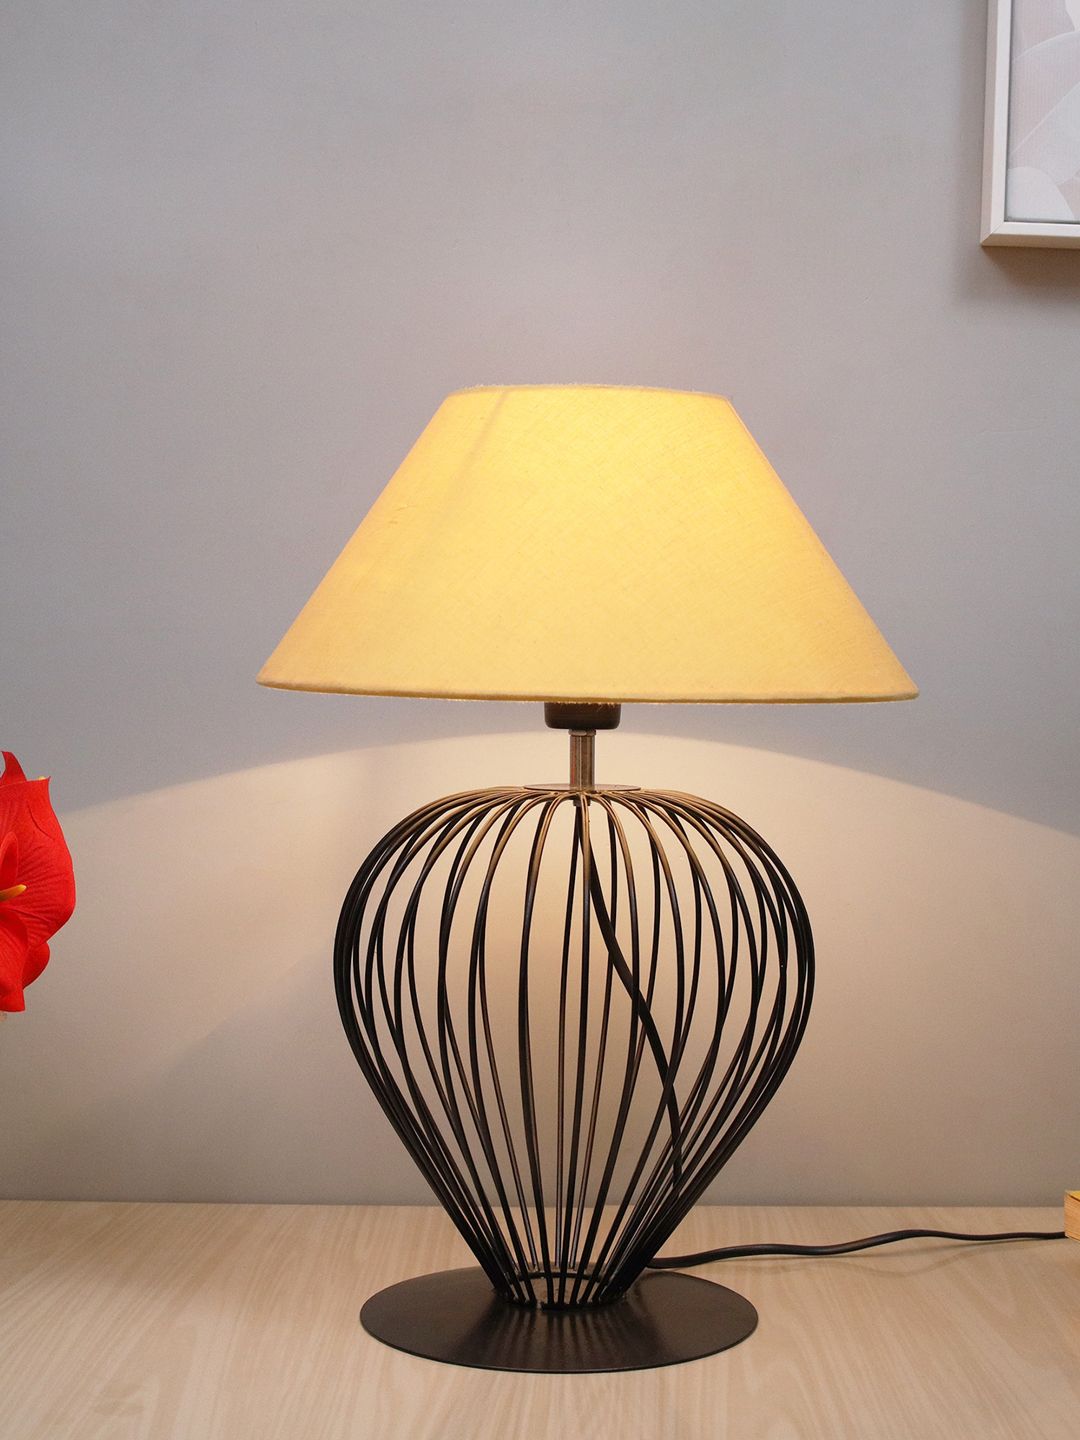 Homesake Black Modern Tulip Table Lamp With Golden Shade Price in India